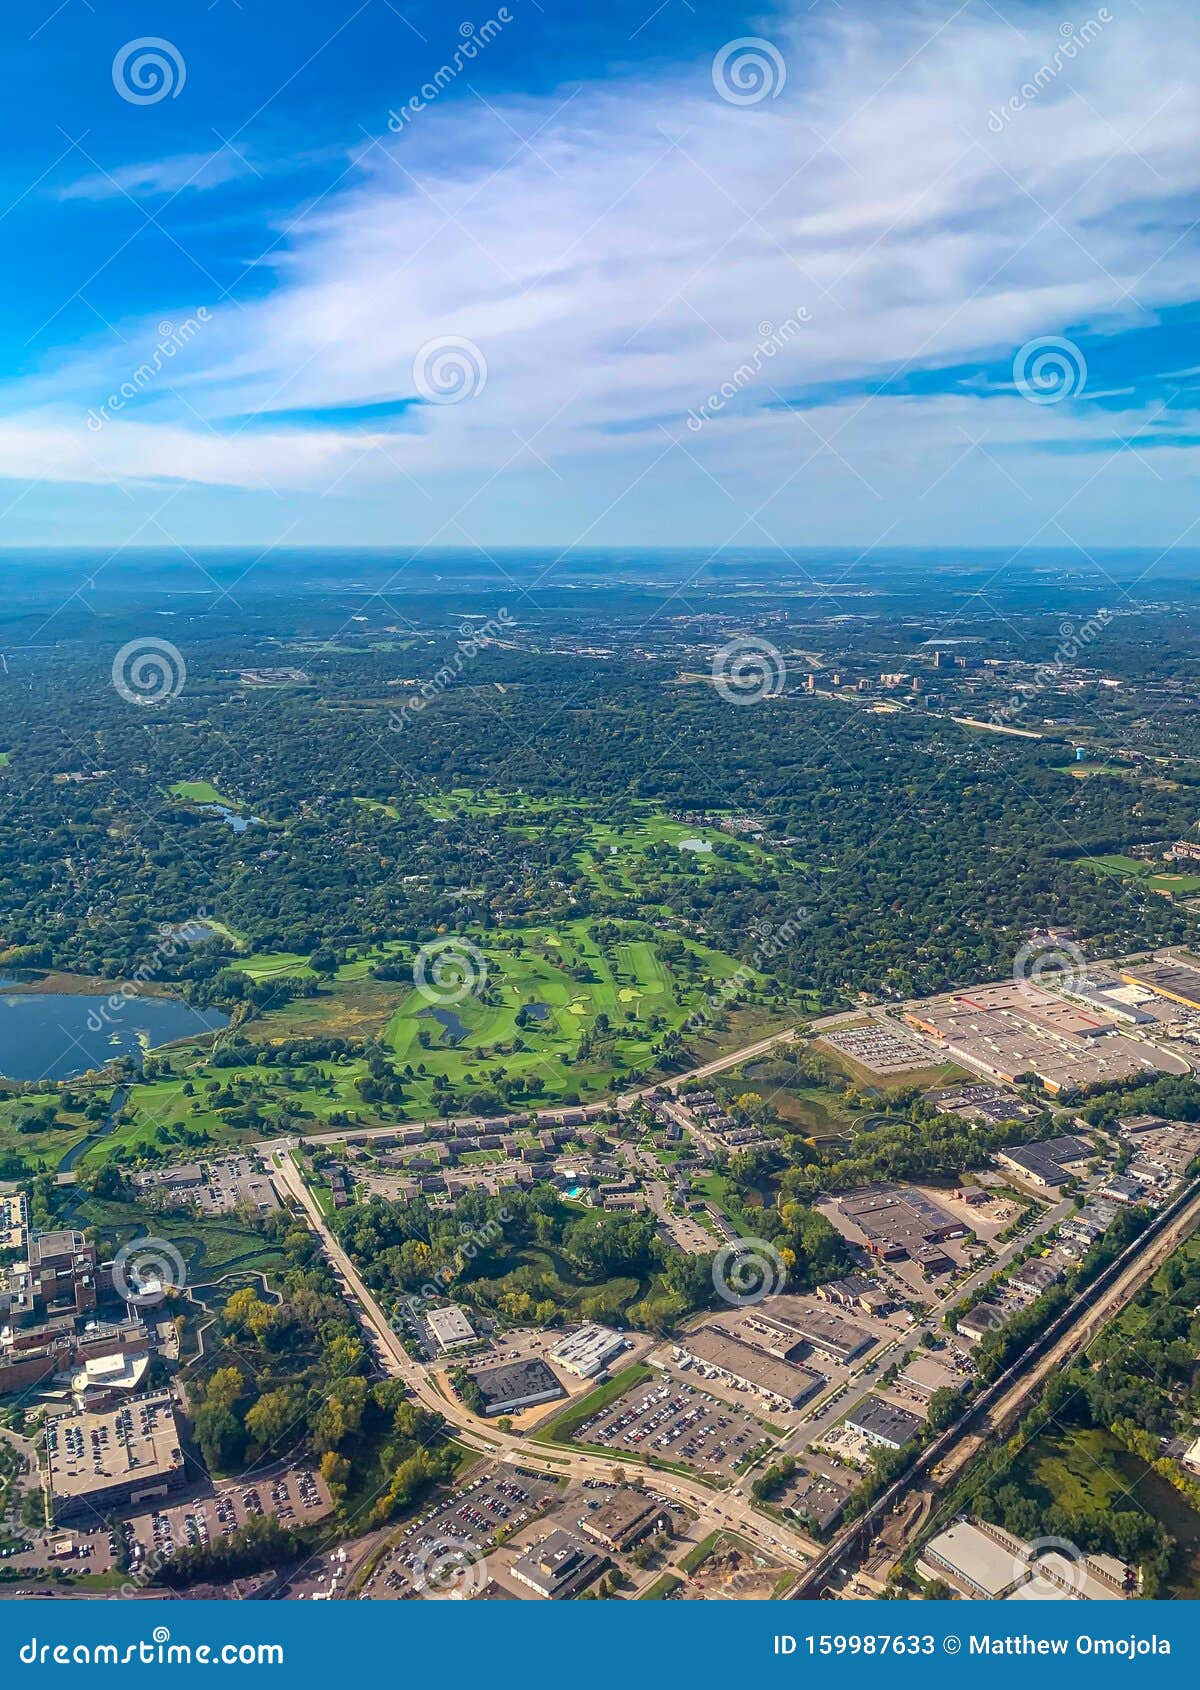 aerial view of golf courses in a densely forested urban development